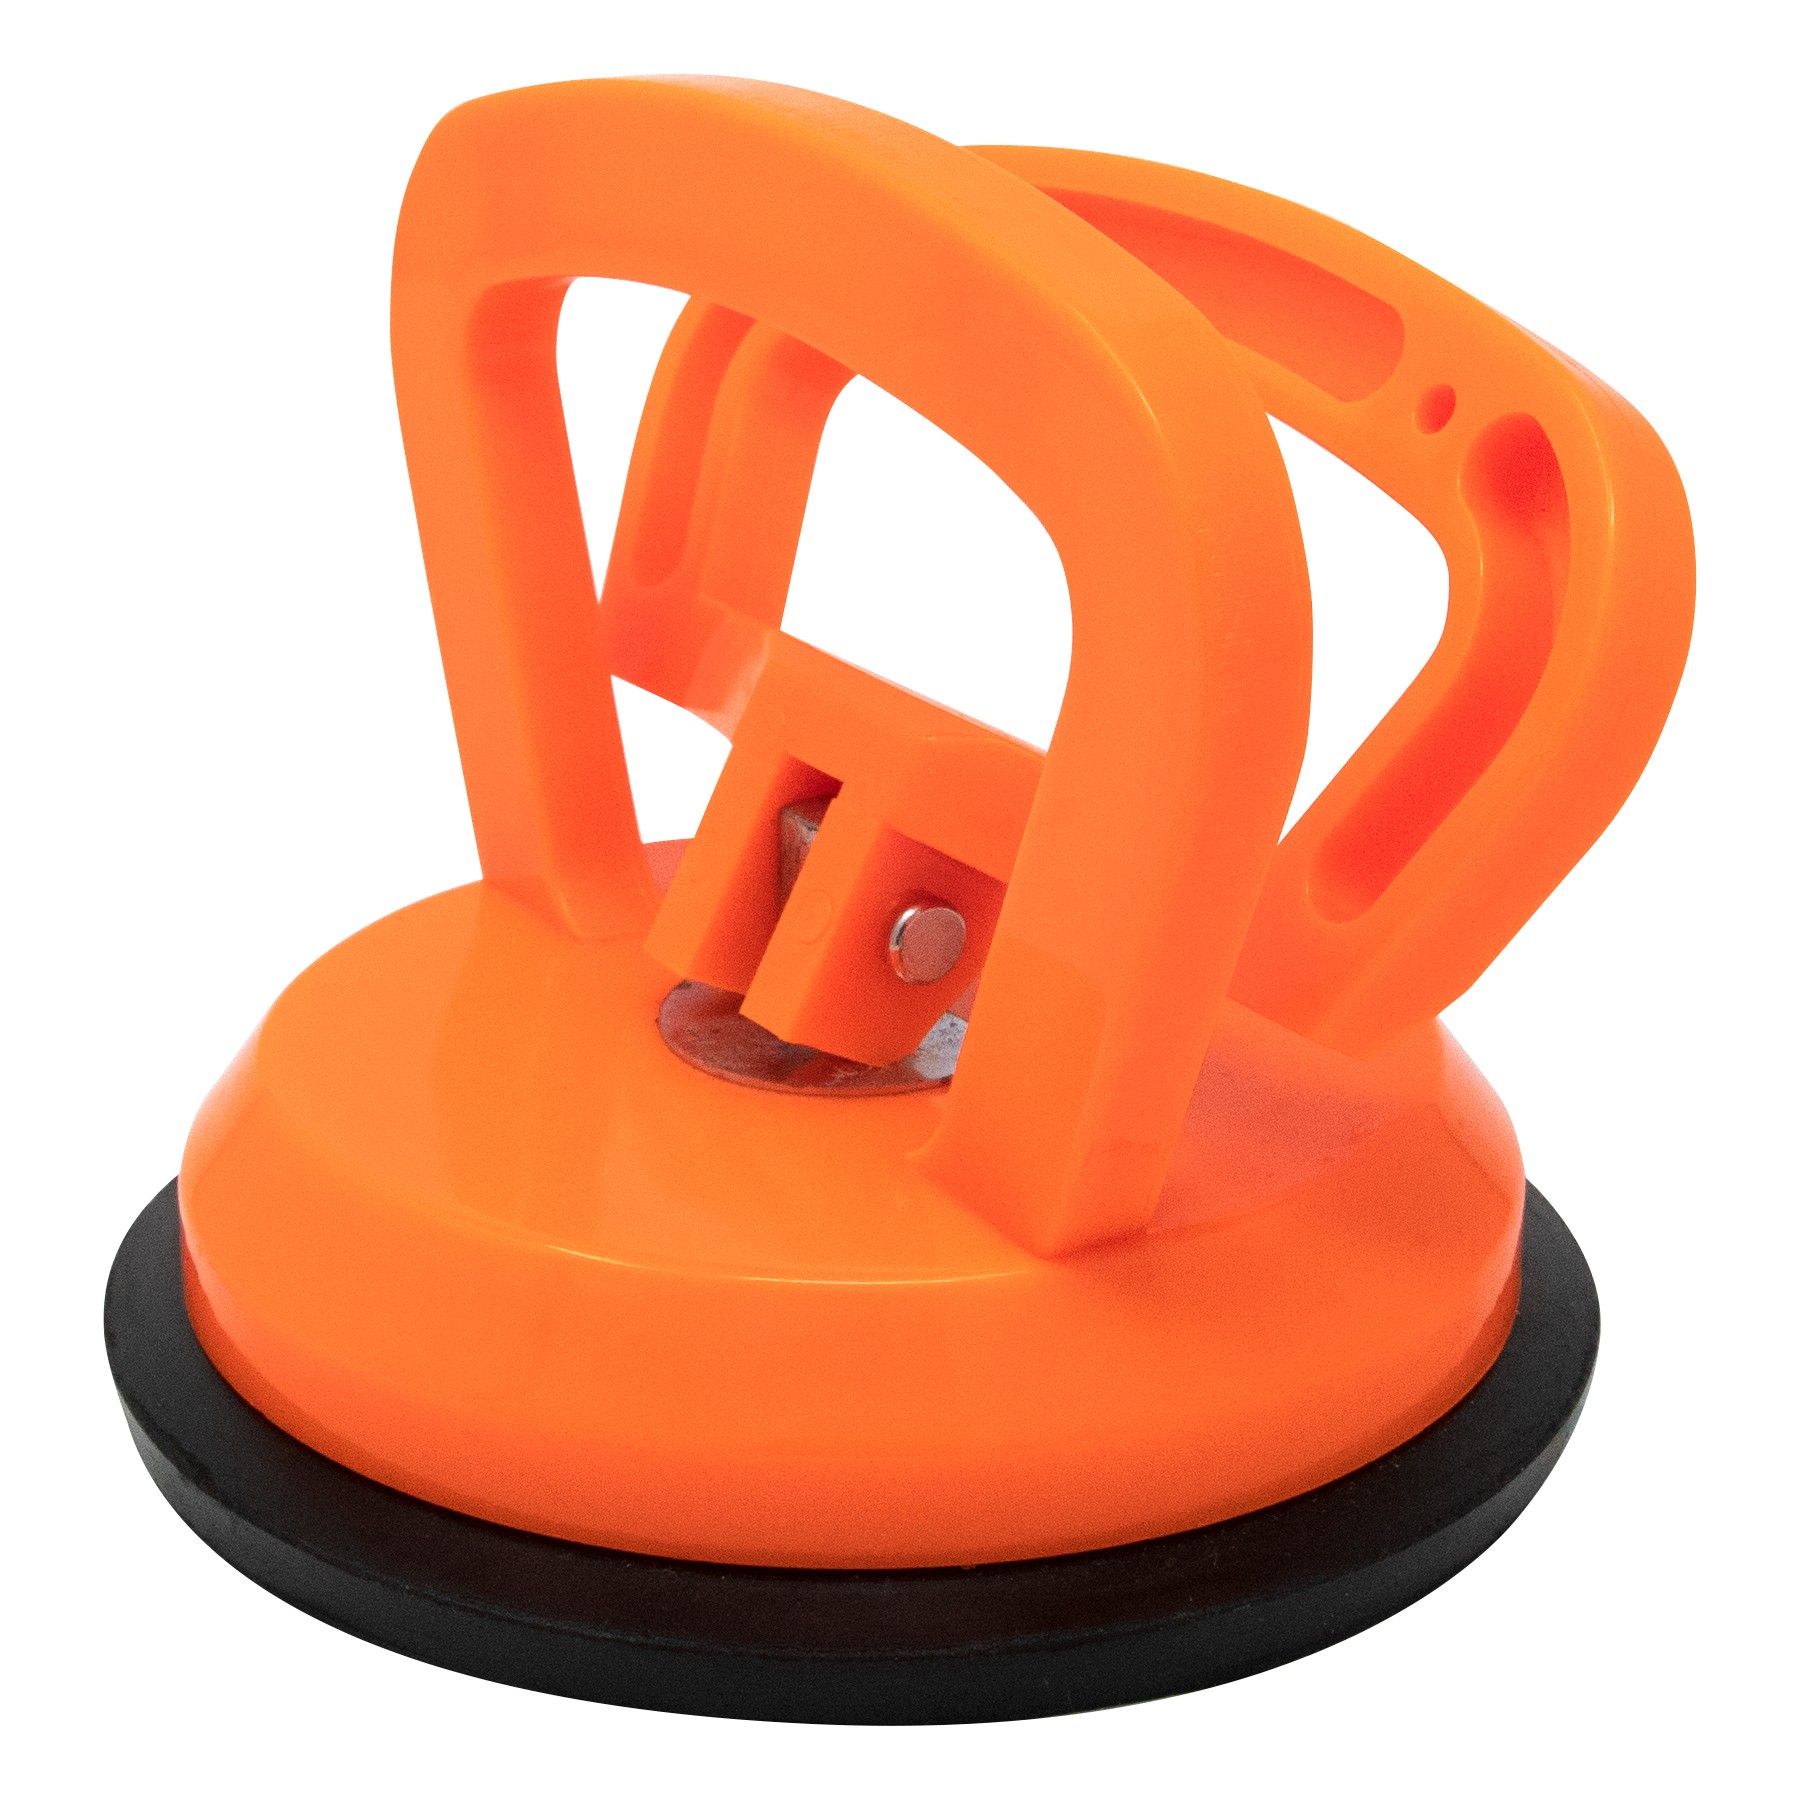 Aes Industries 4 1 2 Plastic Suction Cup Aes Industries